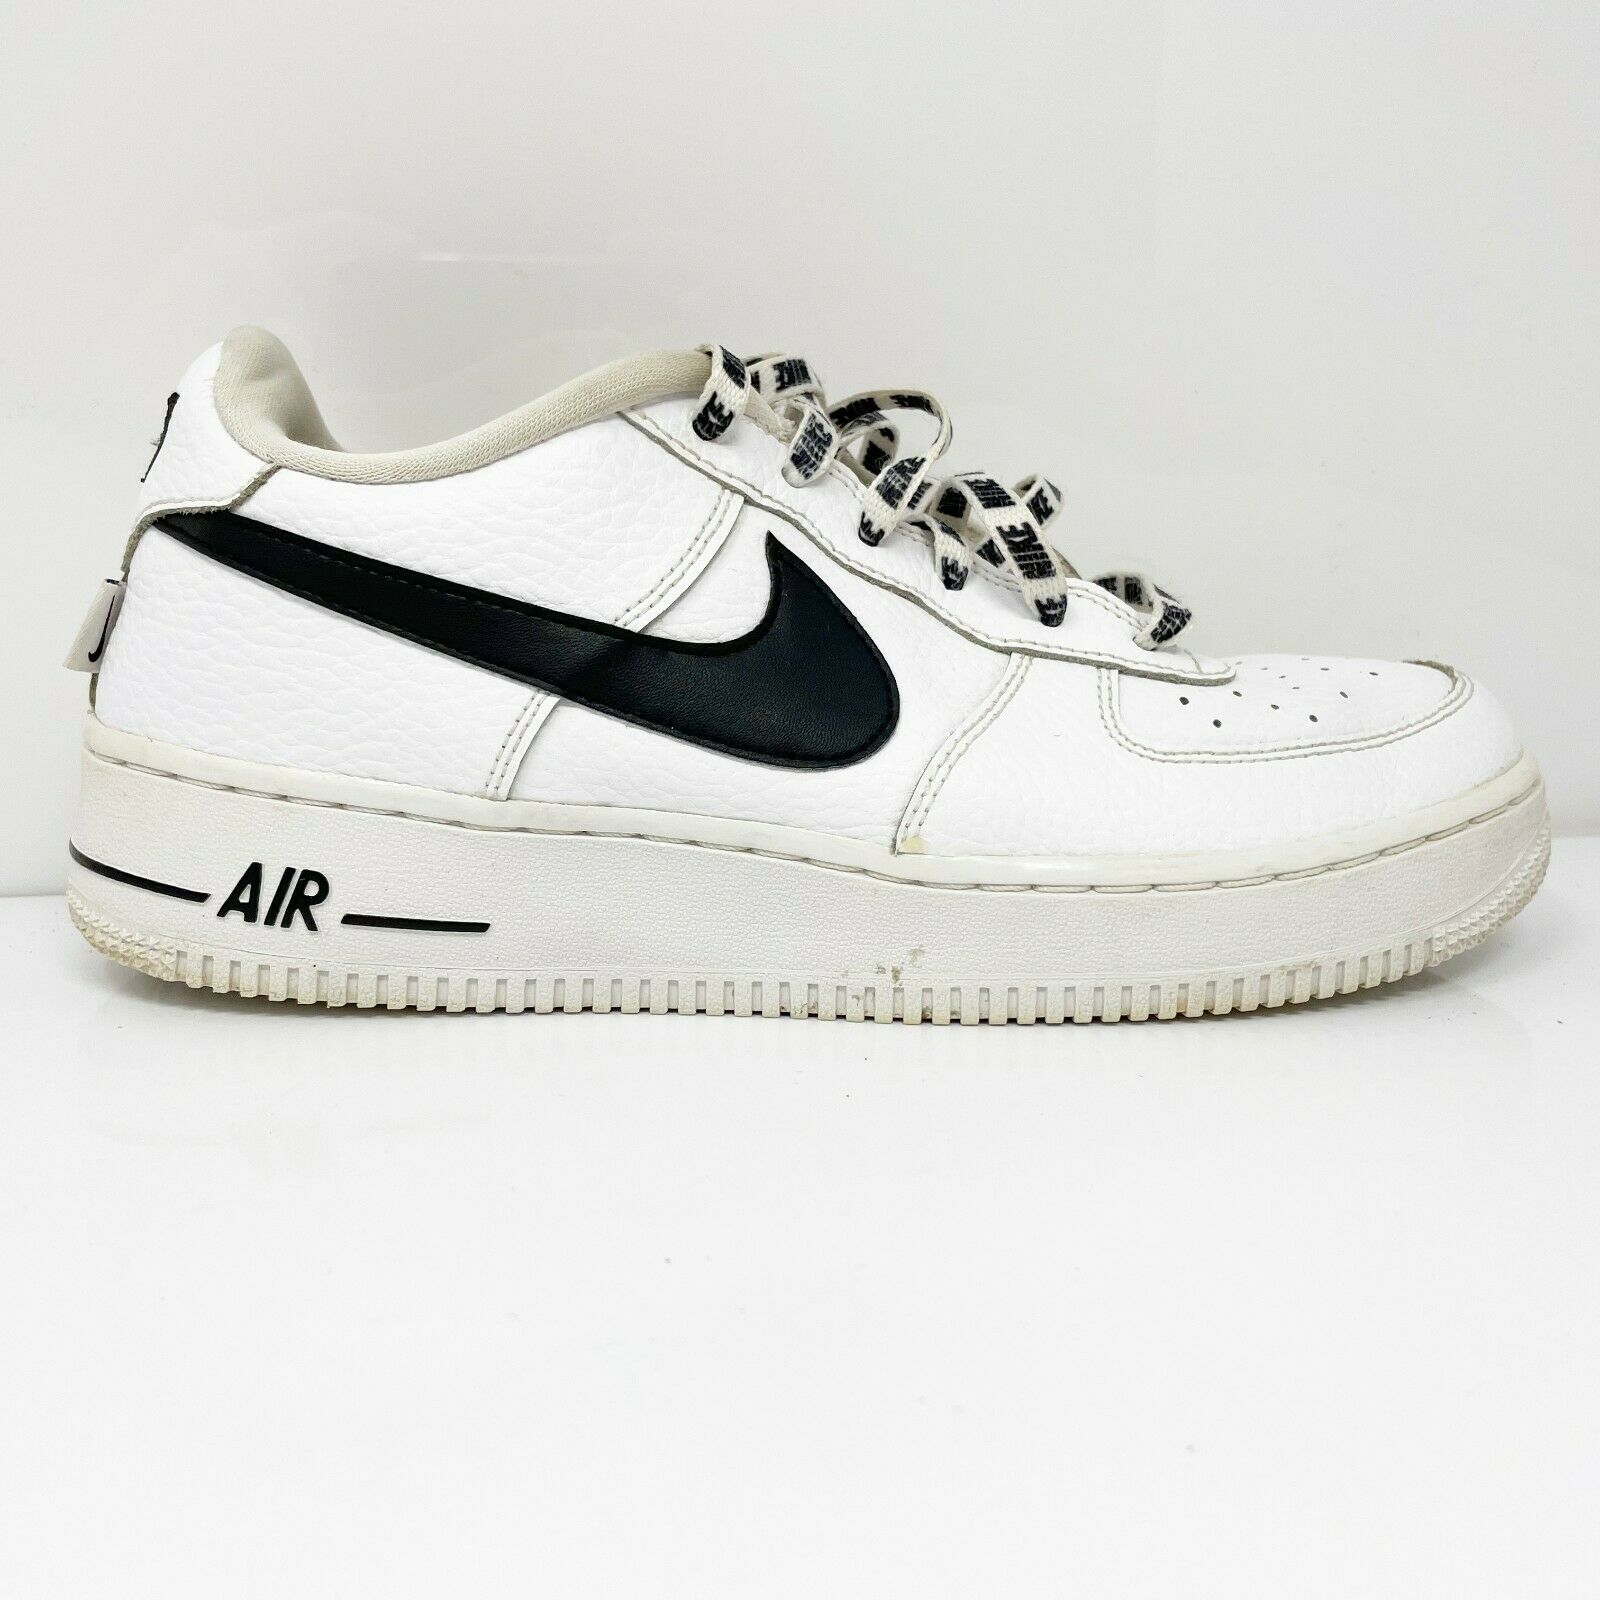 Nike Boys Air Force 1 LV8 820438-108 White Black Running Shoes Sneakers Size 7Y